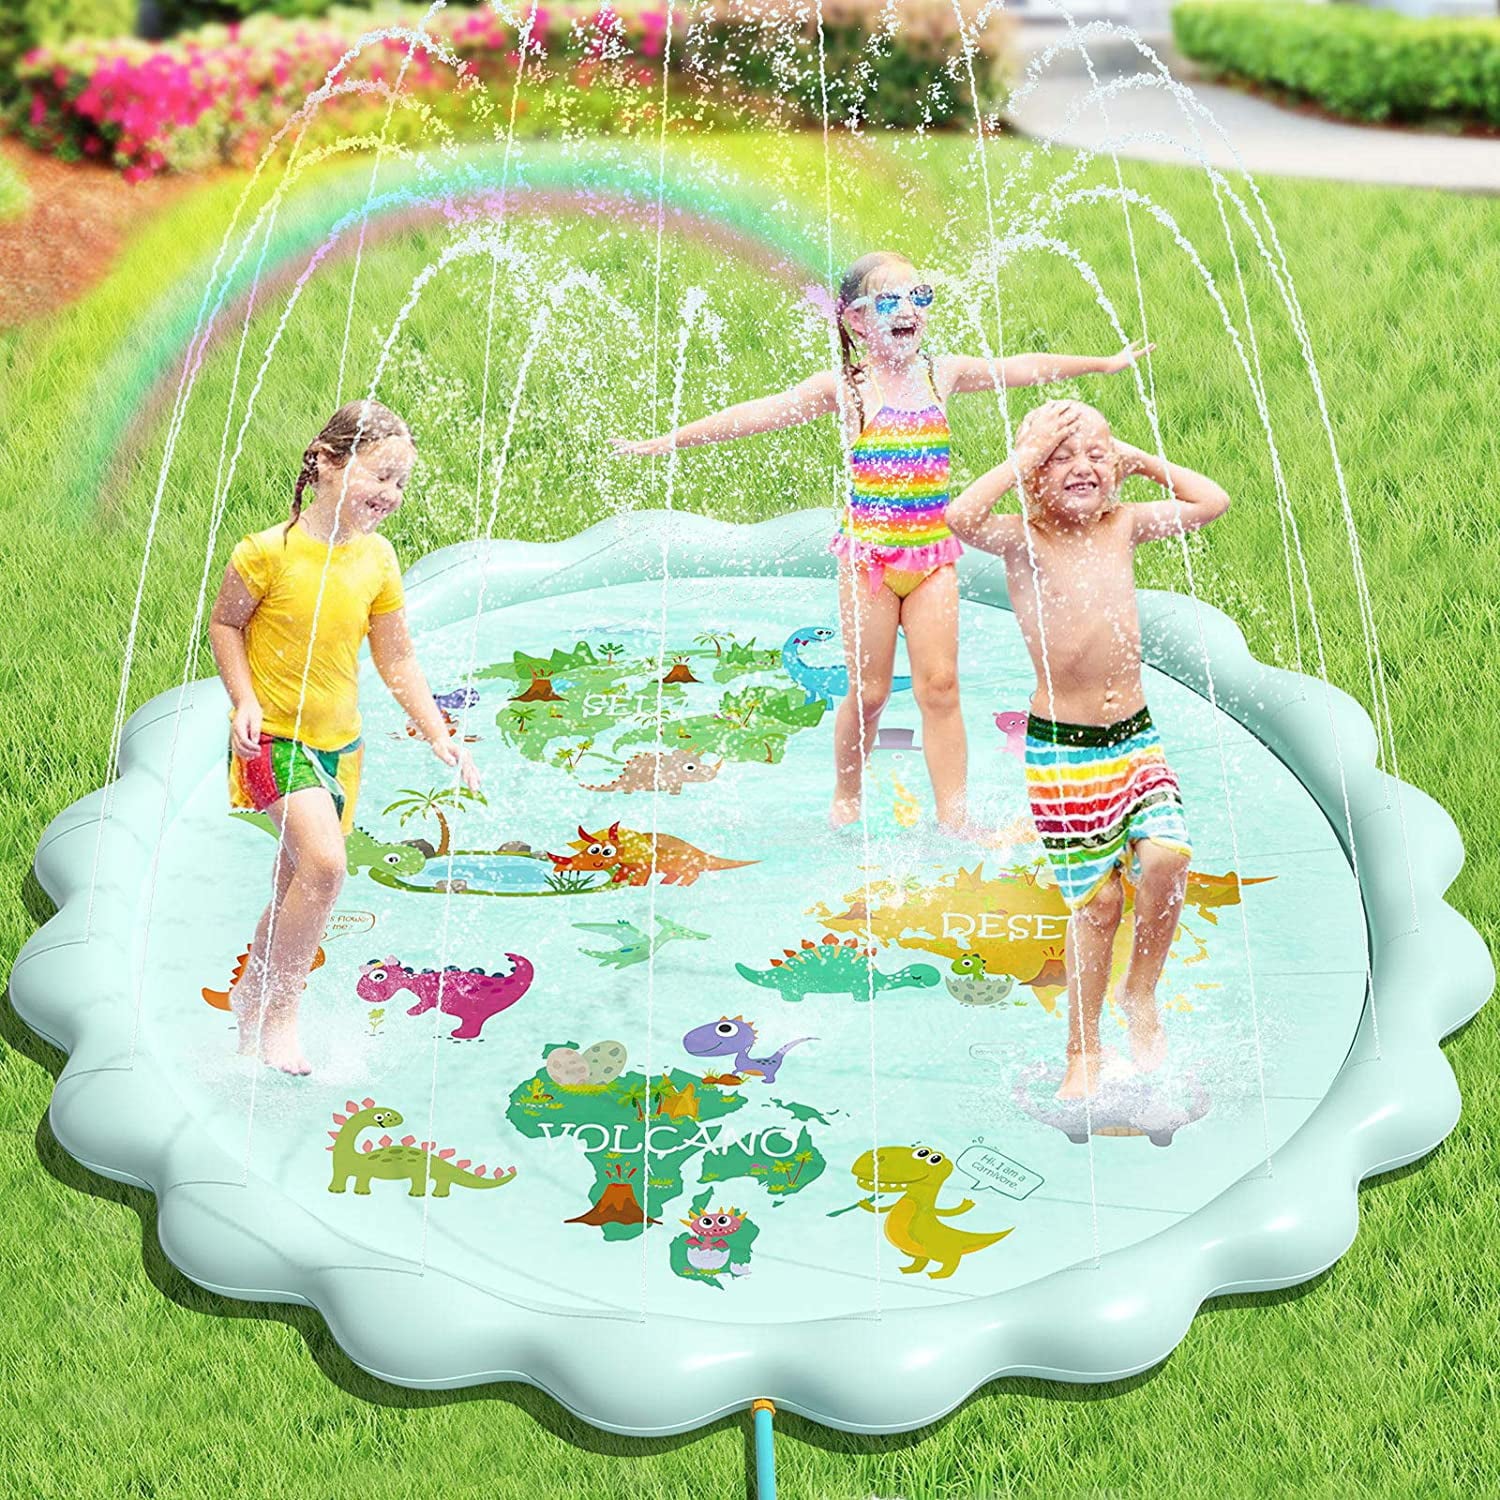 Intera Splash Pad Water Sprinklers Play Mat (79") for Kids Toddlers Outside Toys, Baby Infant Wadding Pool, Kiddie Baby Pool, Outdoor Backyard Fountain Play Mat for 3-12 Year Old Boys Girls